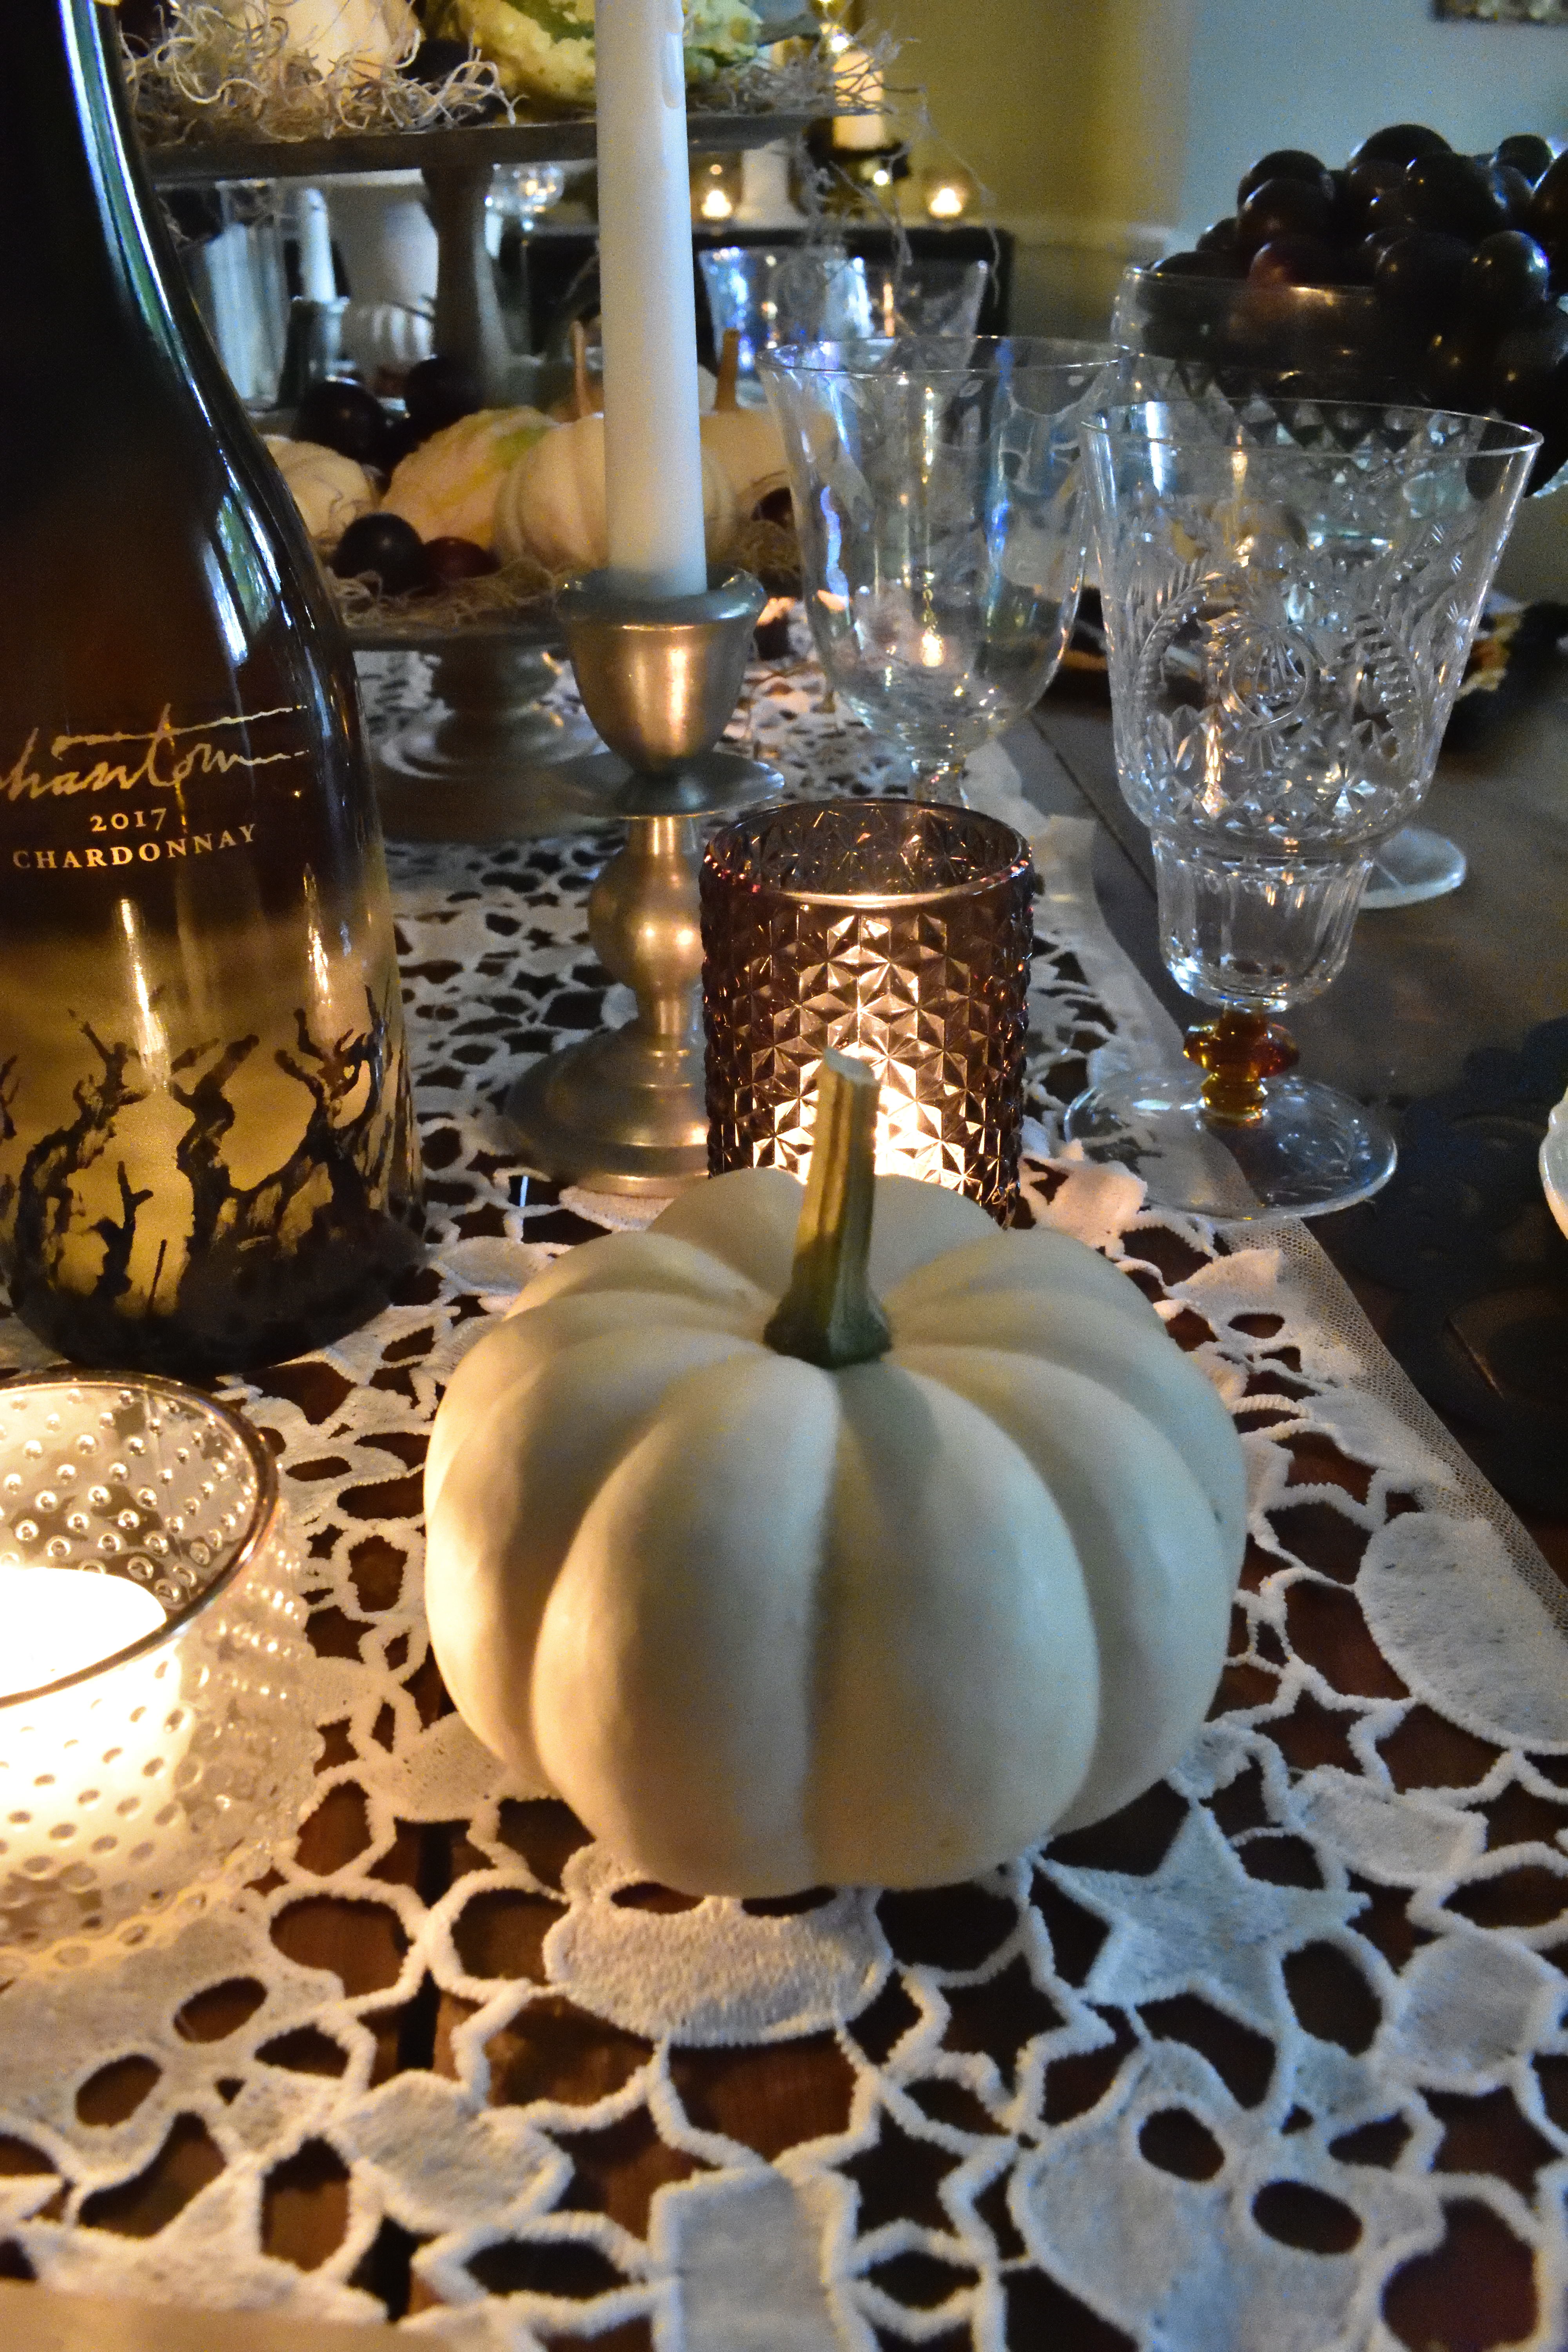 Halloween dinner party decorations